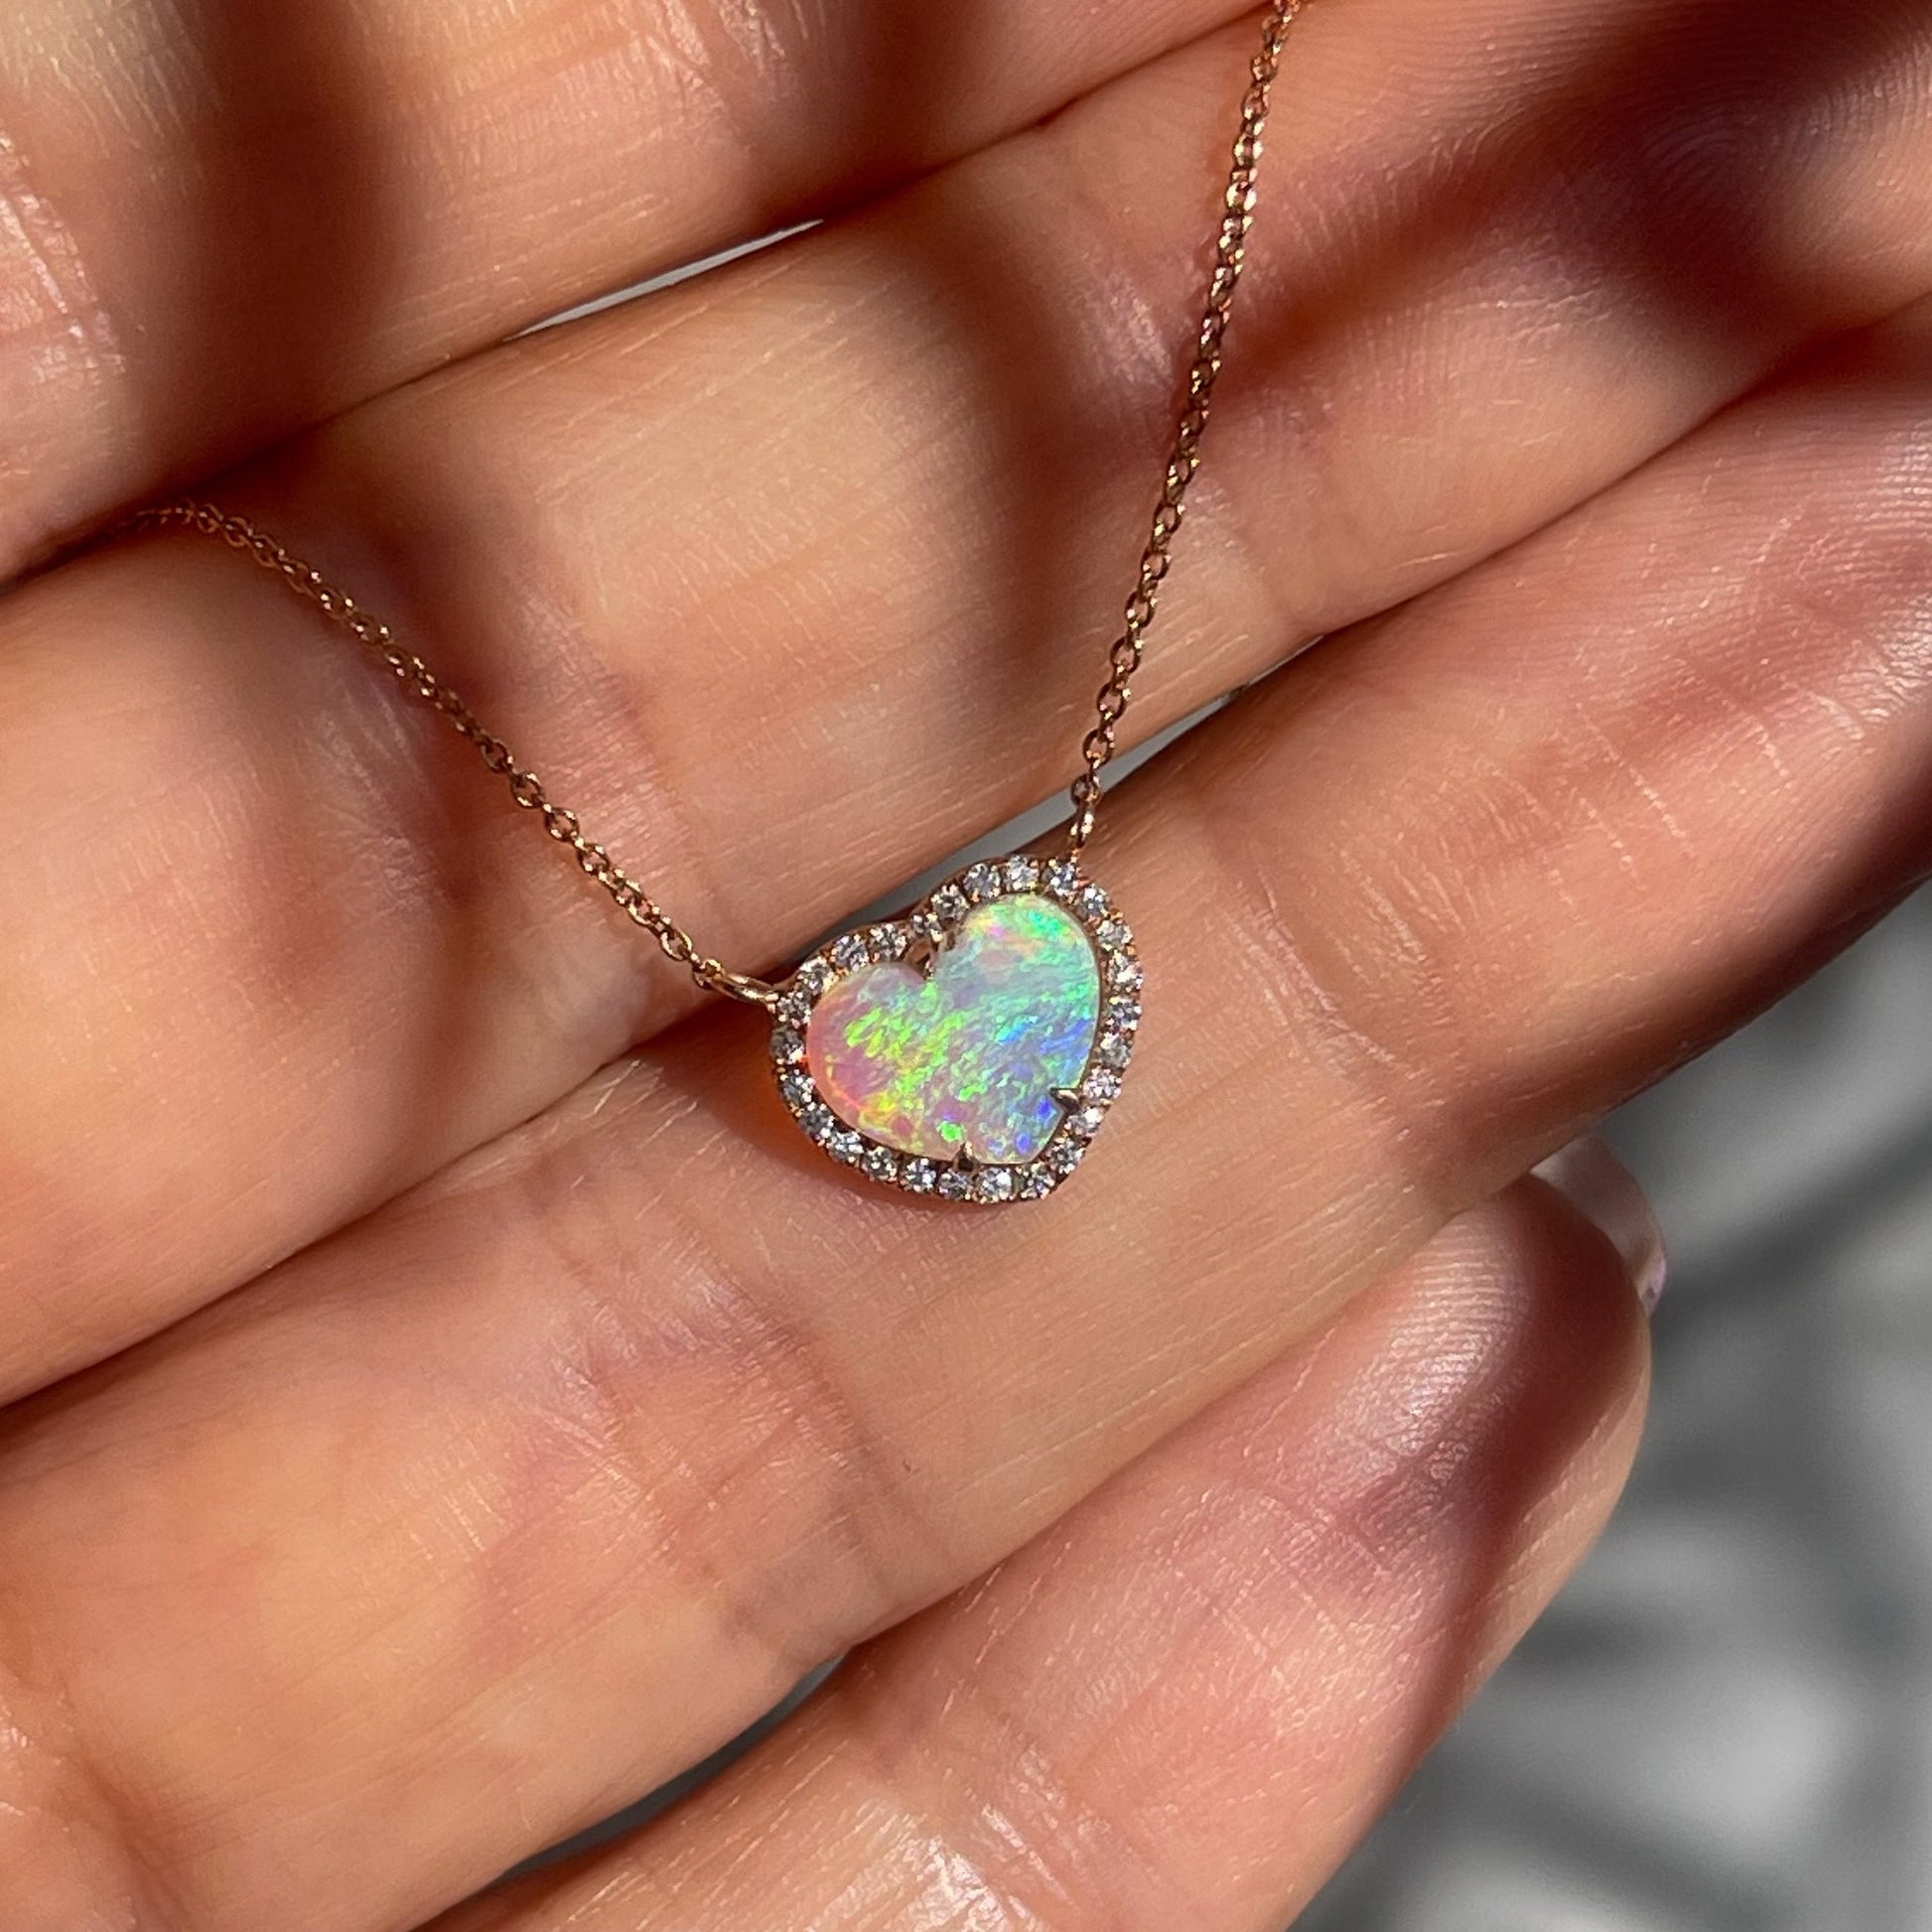 An Opal Heart Necklace by NIXIN Jewelry rests upon a hand  and sparkles in the sun. The natural opal necklace is made of 14k rose gold.